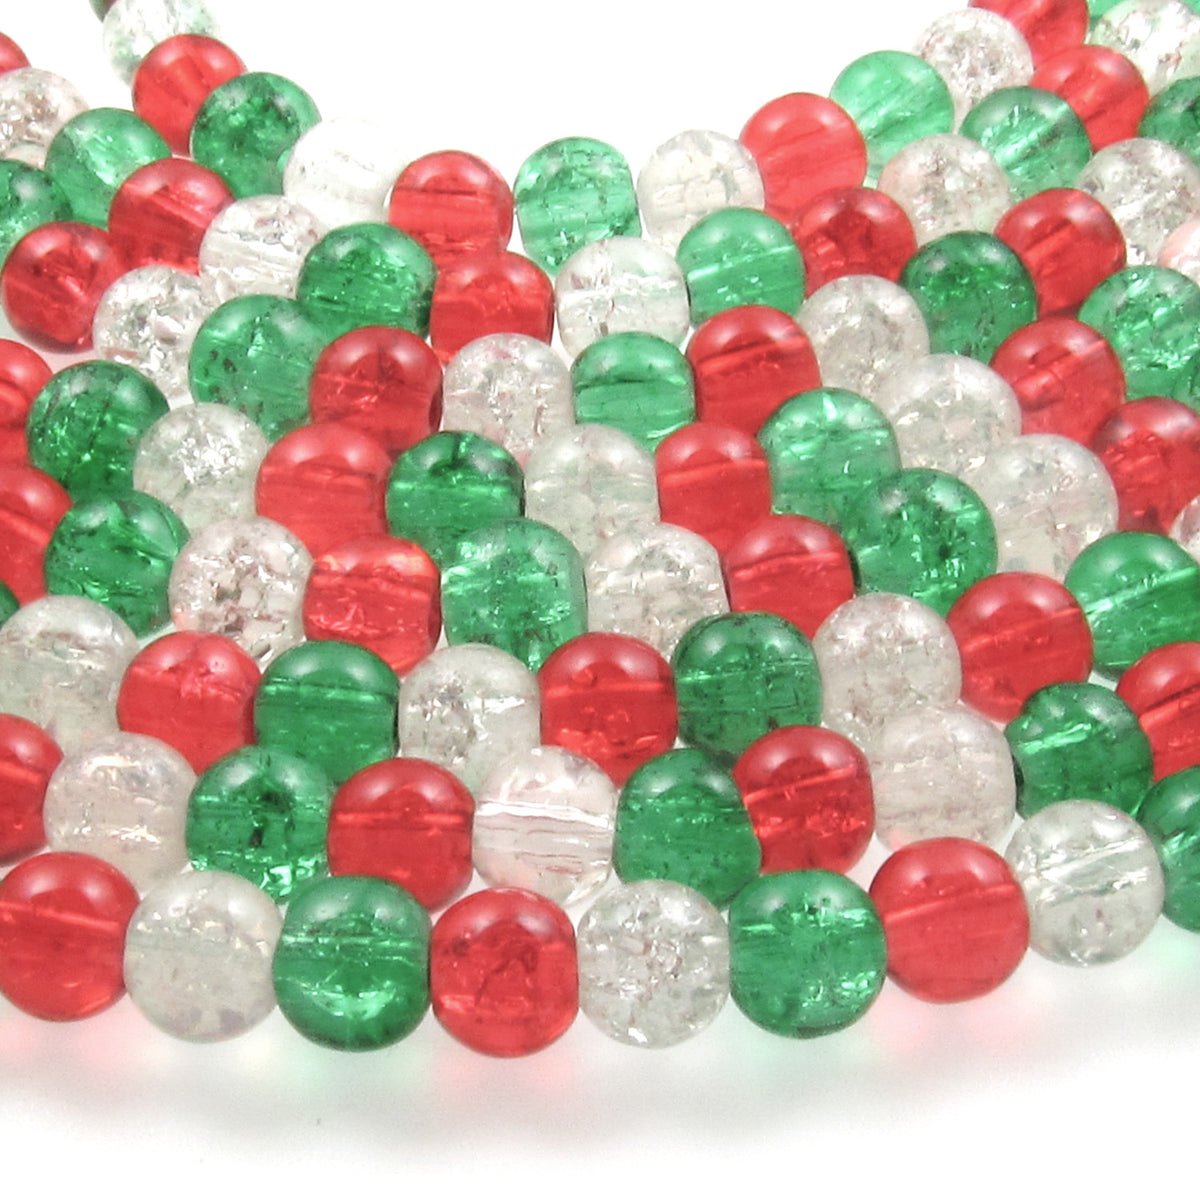 12 oz. Package of Red & Green Lampwork Beads, 6 oz. of Each Color